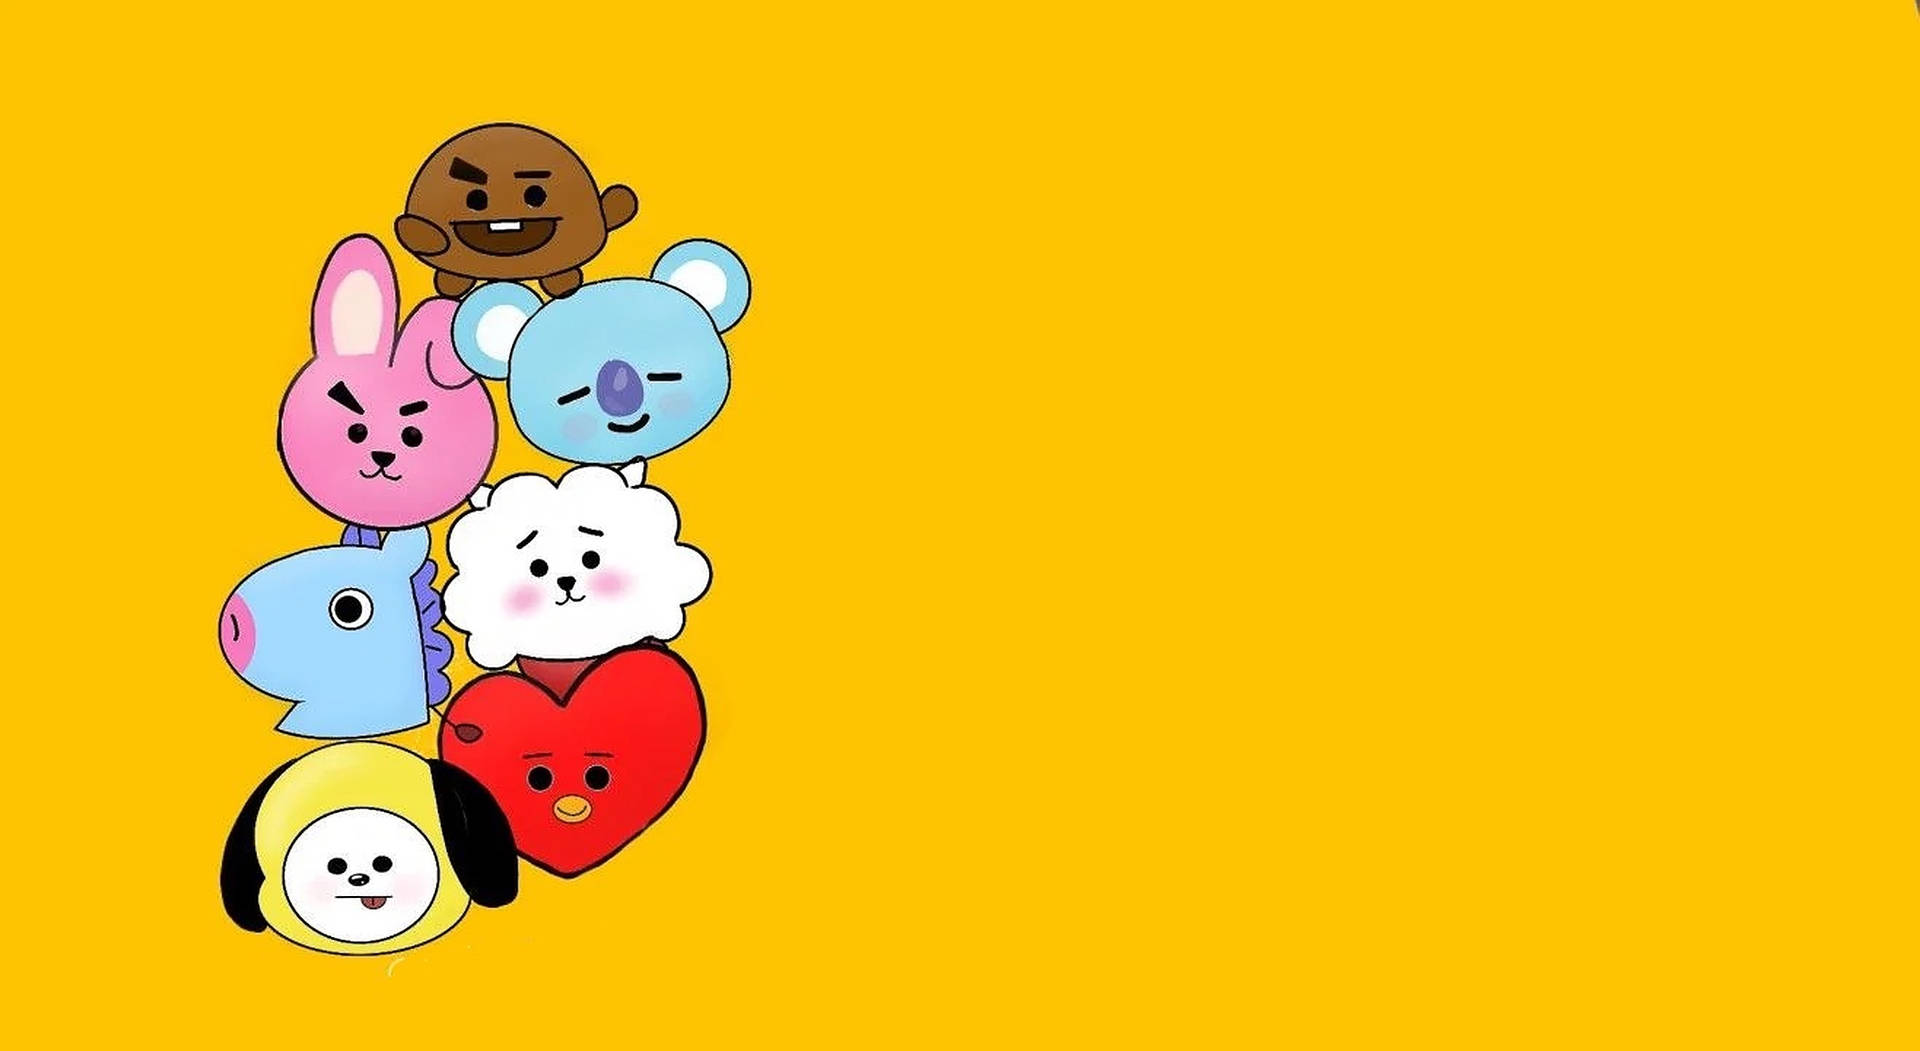 Top 999+ Shooky Bt21 Wallpapers Full HD, 4K✅Free to Use